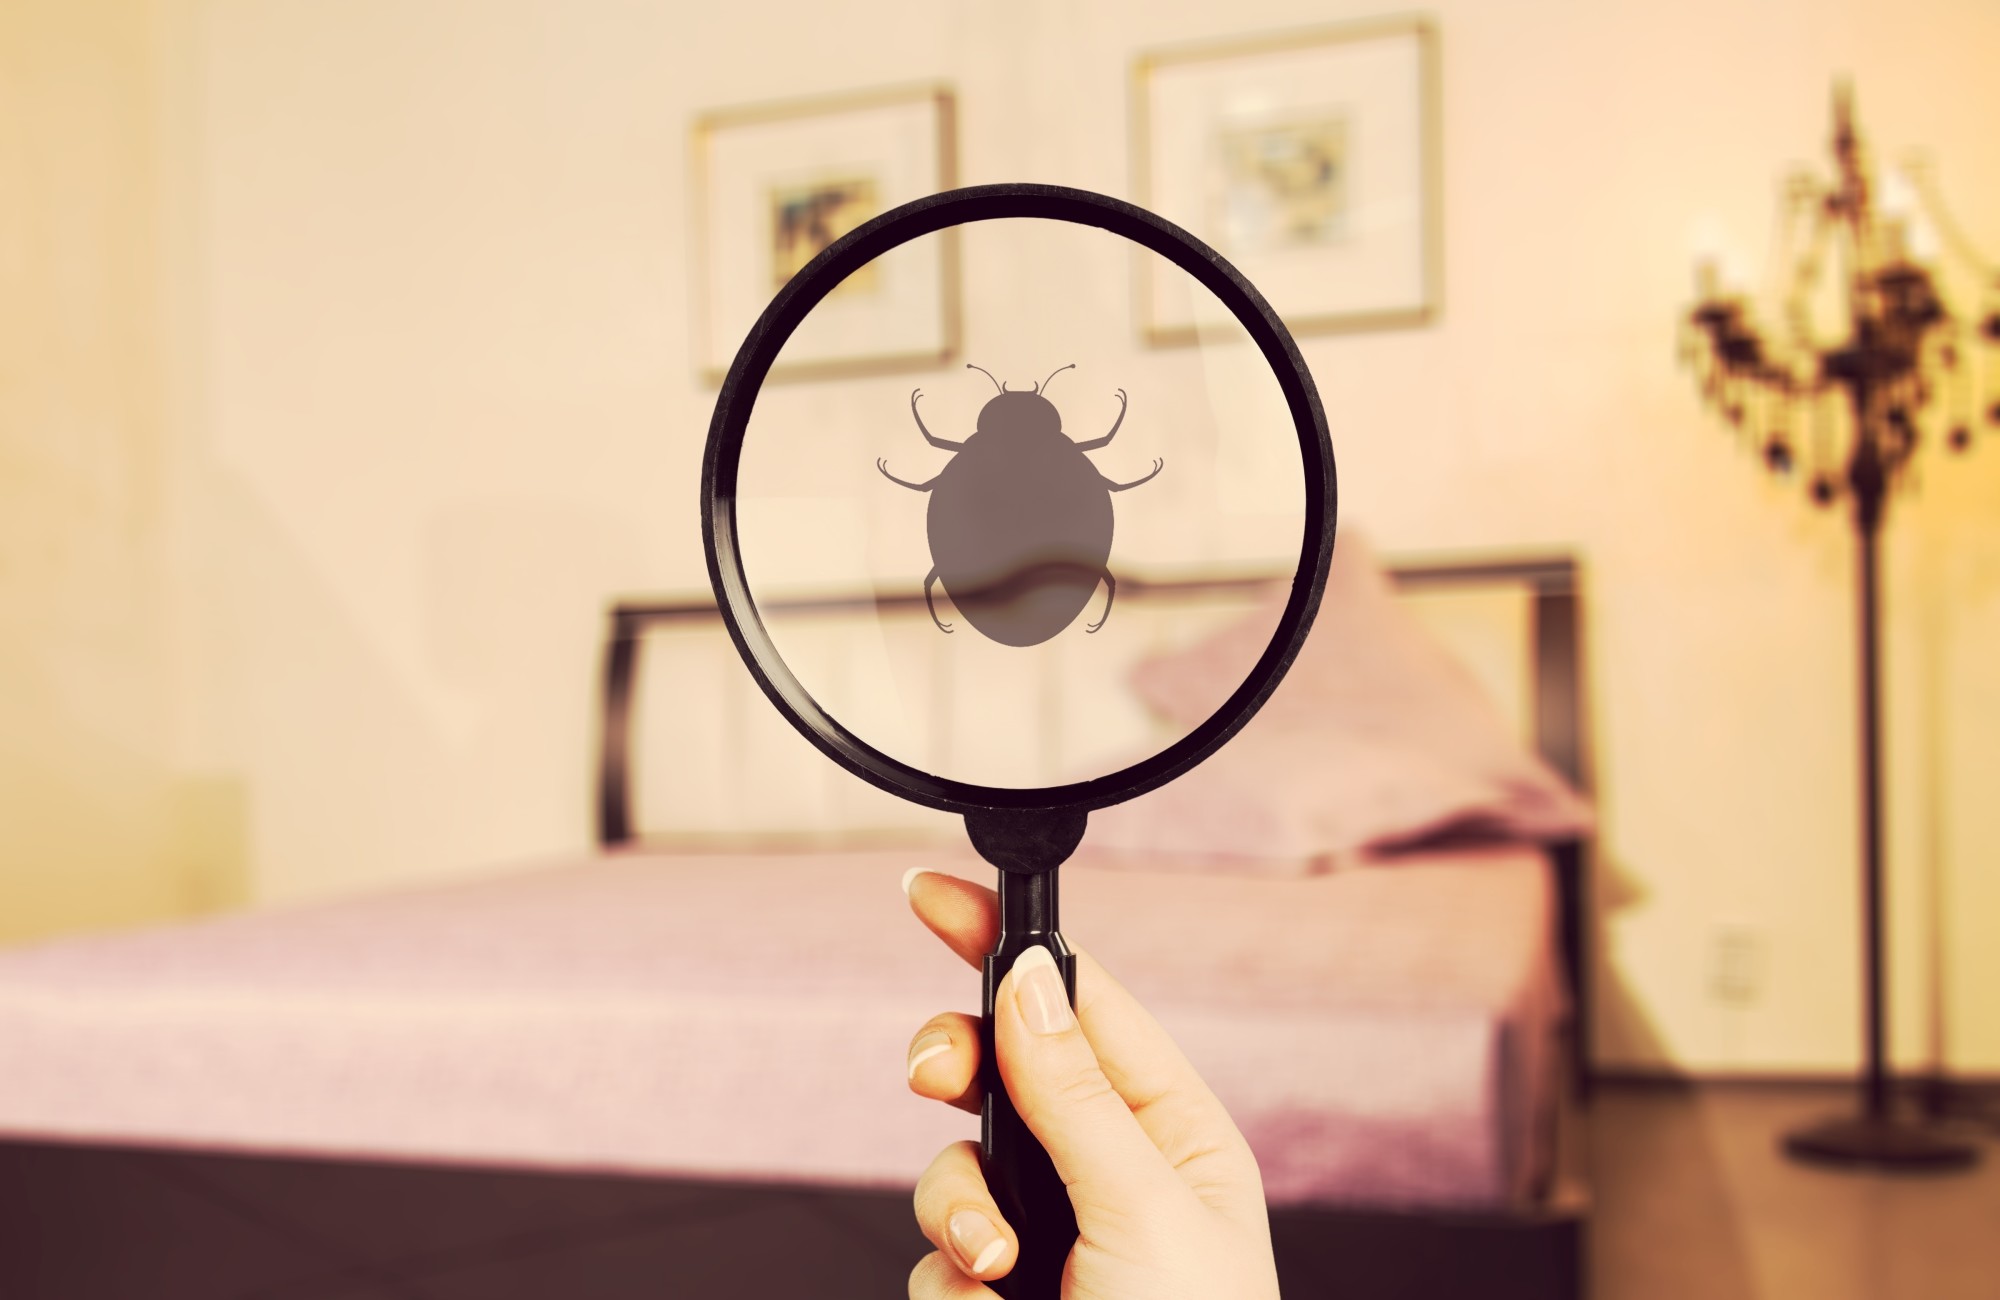 Did you know that bed bugs can hitch a ride in your suitcase? Learn how to check for bed bugs in a hotel room to avoid transporting the unwanted pests home.